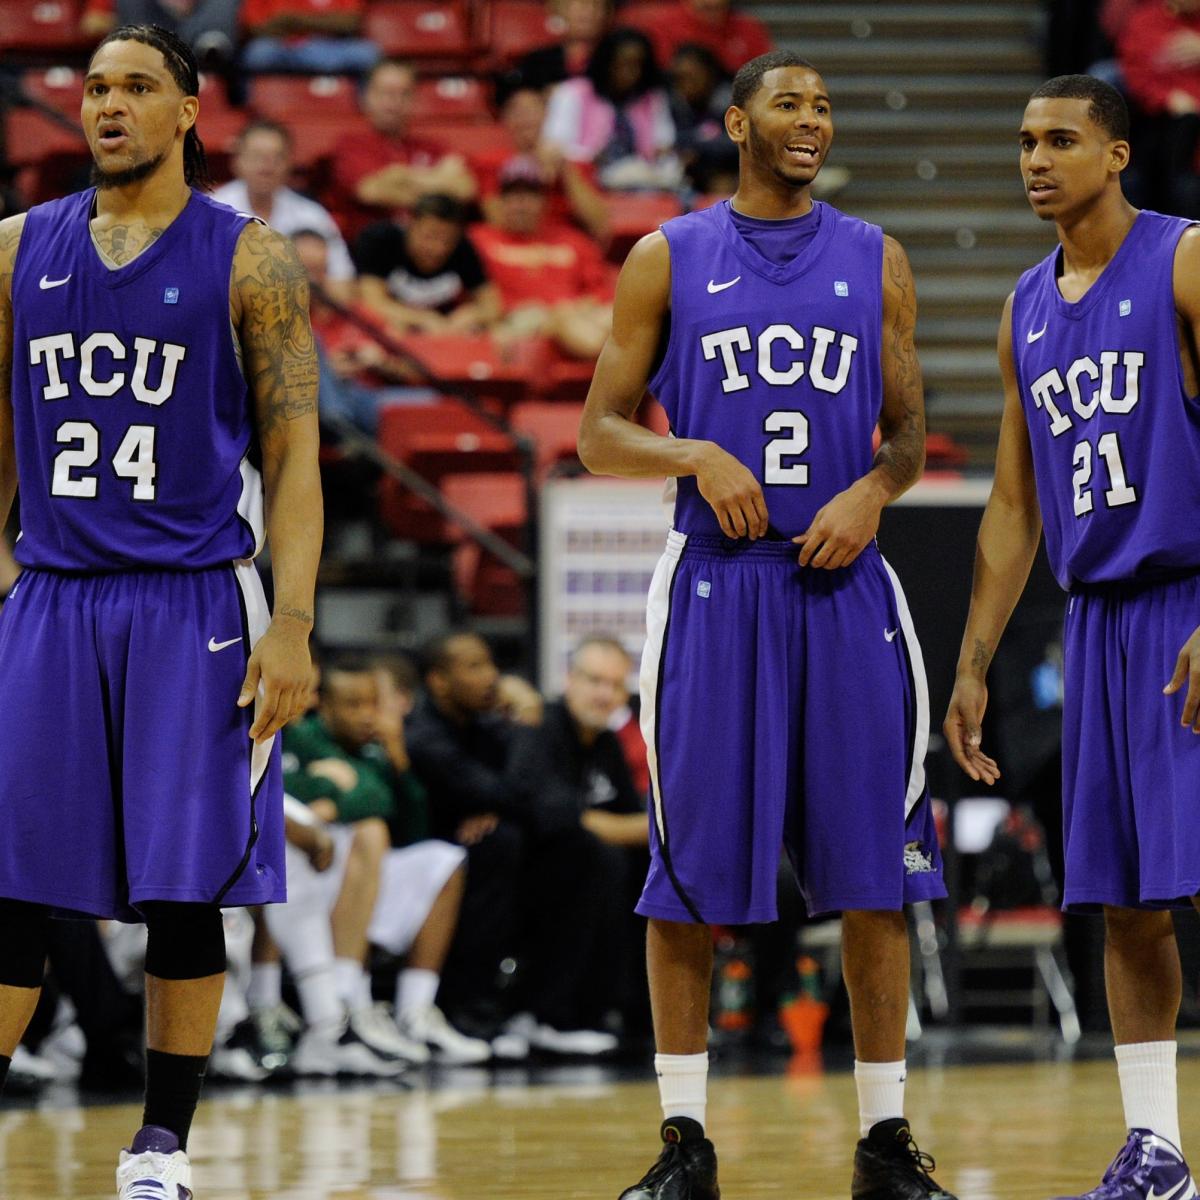 CBI Basketball Tournament 2012 Schedule, TV Info, Dates and Game Time